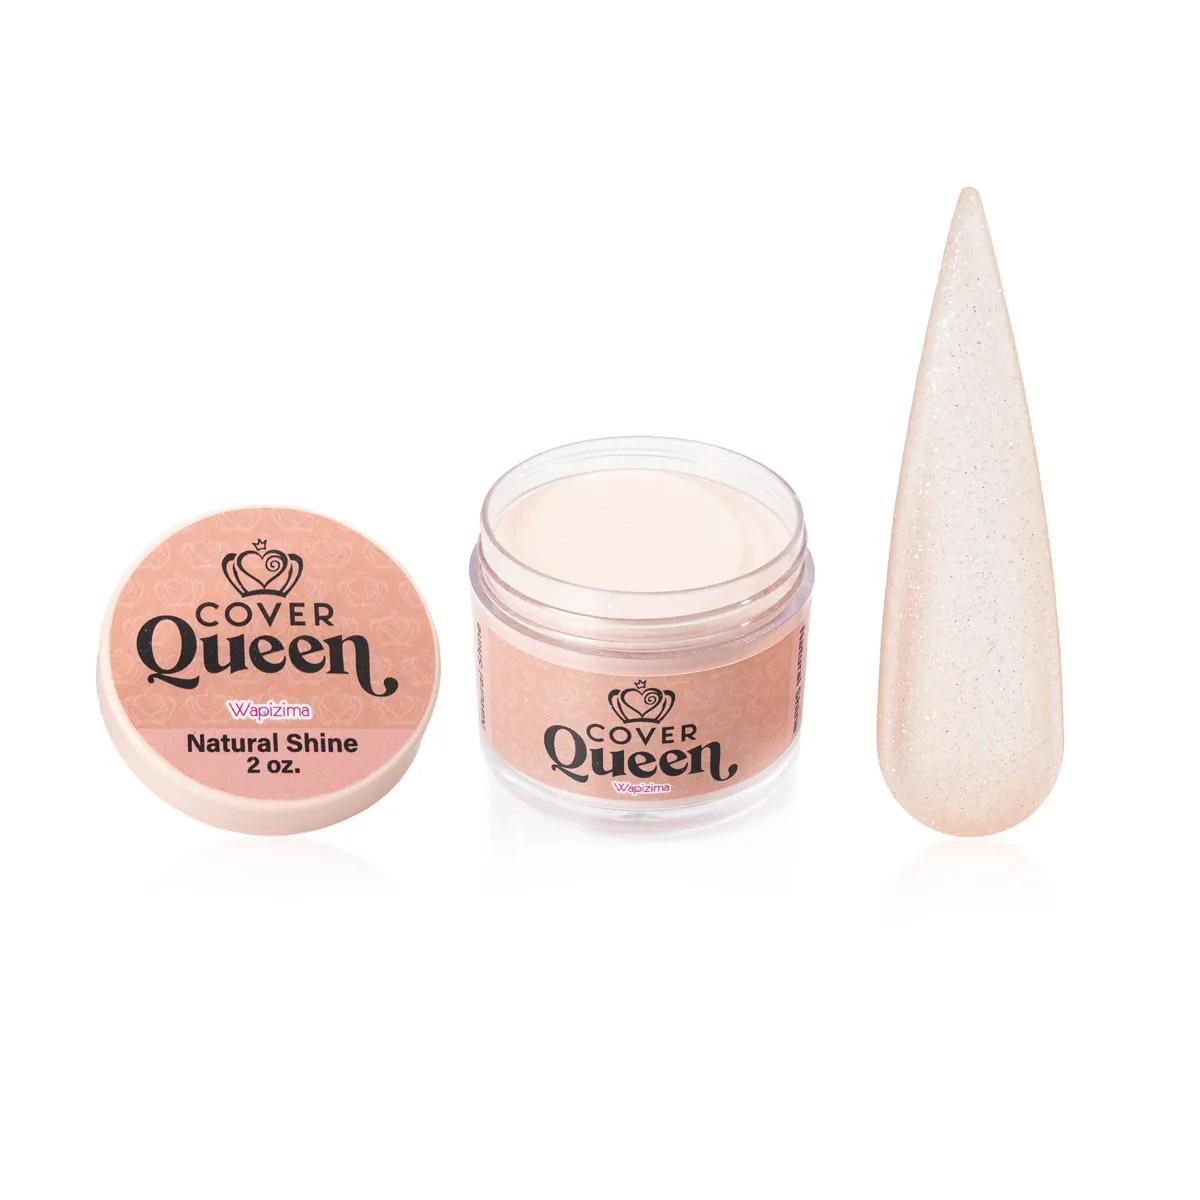 W.Cover Queen Natural Shine 2 oz